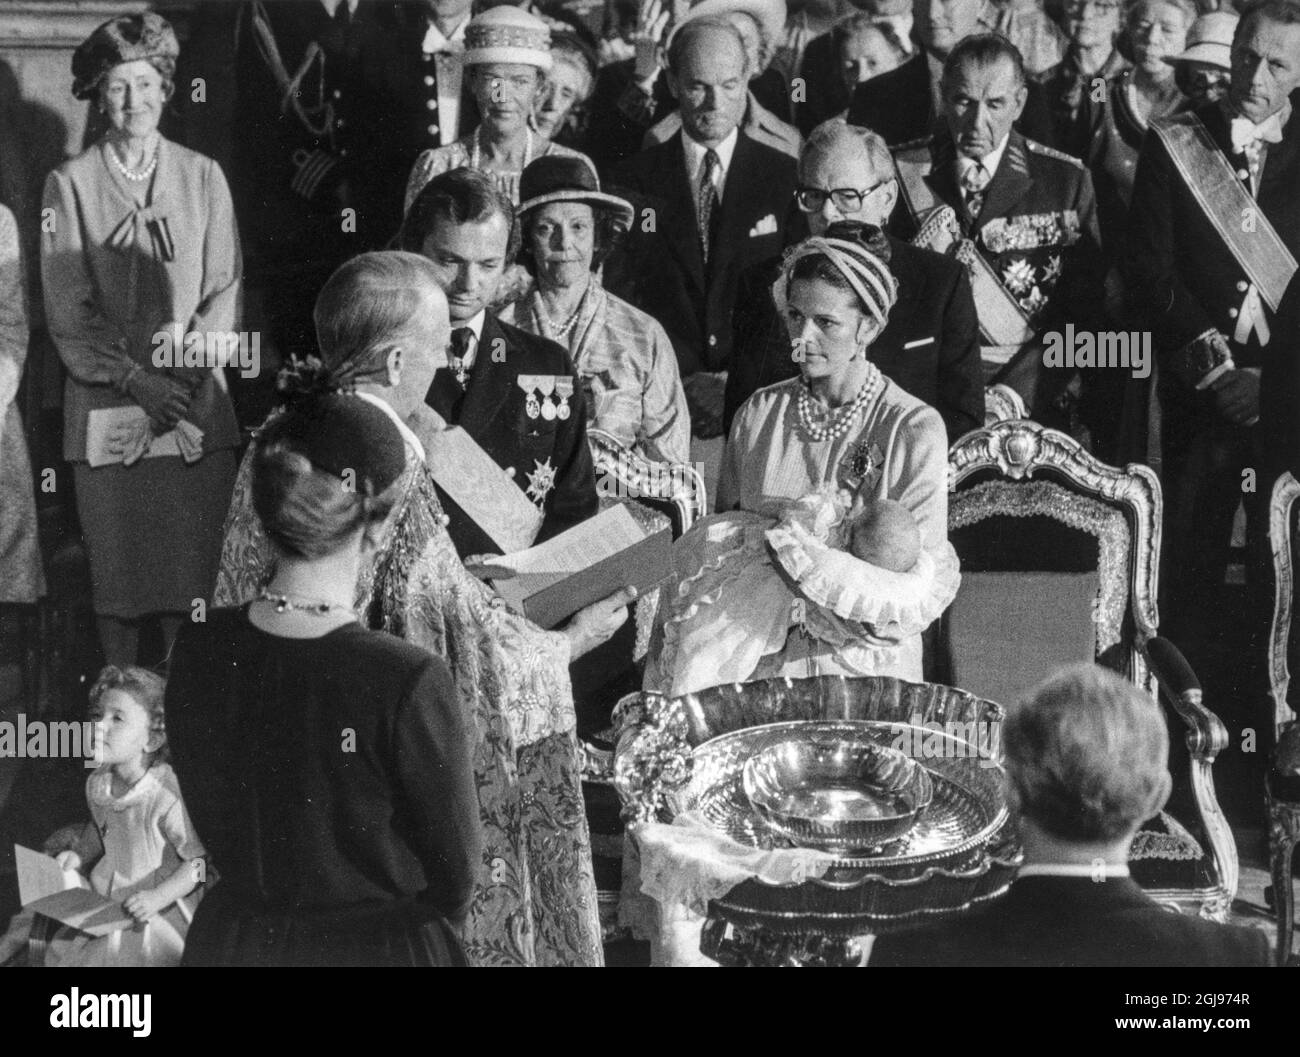 ARKIV STOCKHOLM 1979-08-31 Princess Victoria, King Carl Gustaf and Queen Silvia with Crown Prince Carl Philip during the Christening of Carl Philip in the Royal Chapel ion Stockholm, Sweden, August 31, 1979 Foto: Leif R Jansson / TT / Kod: 50020  Stock Photo